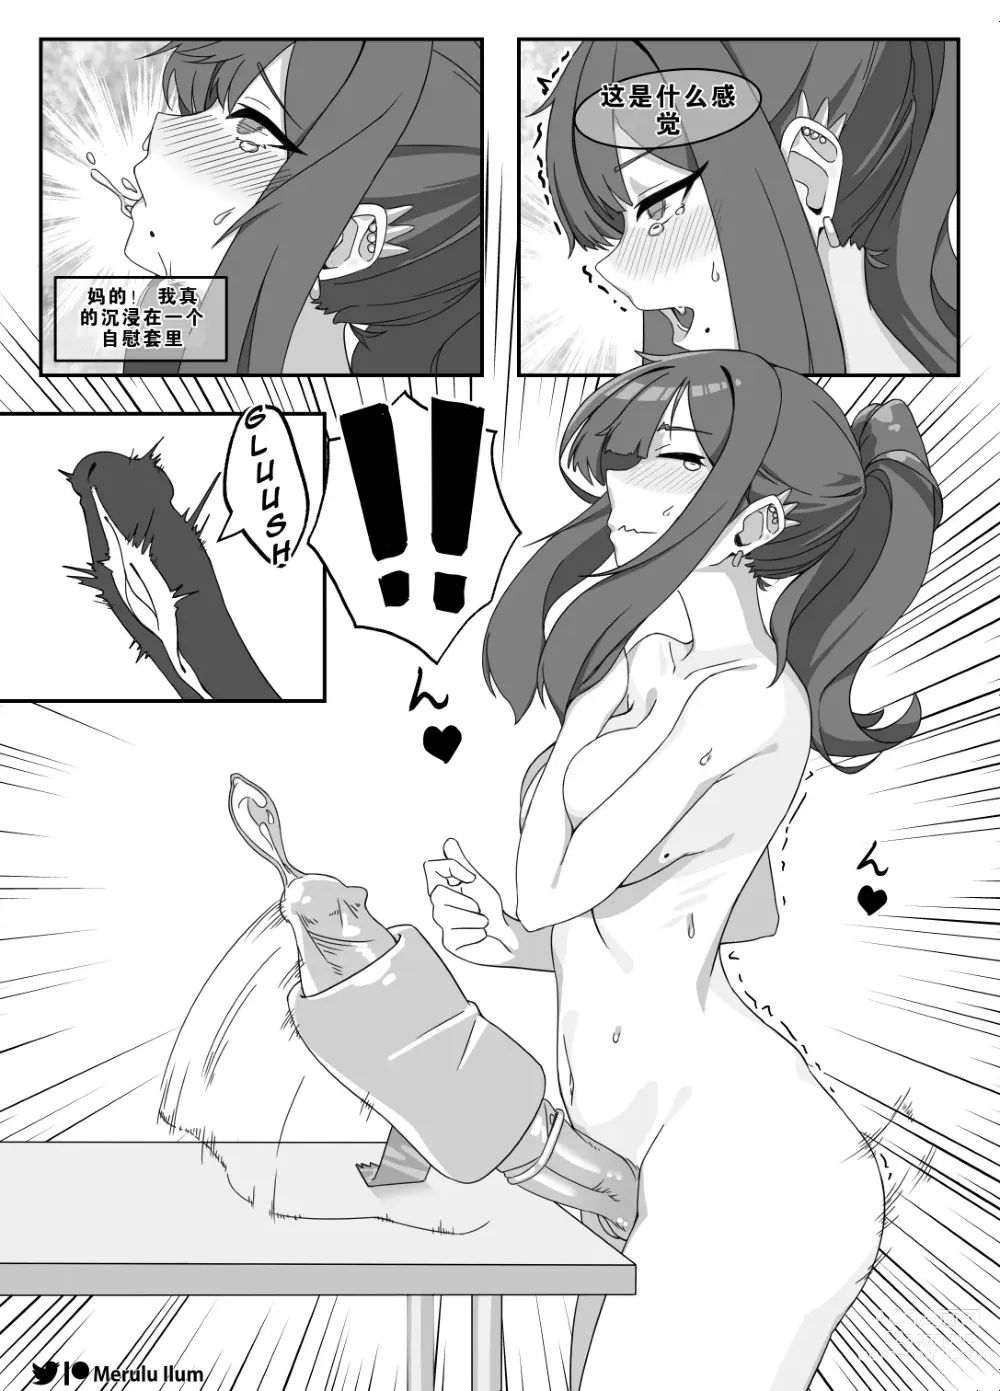 Page 12 of doujinshi Masturbation with a Giant Dick, Lets have fun!